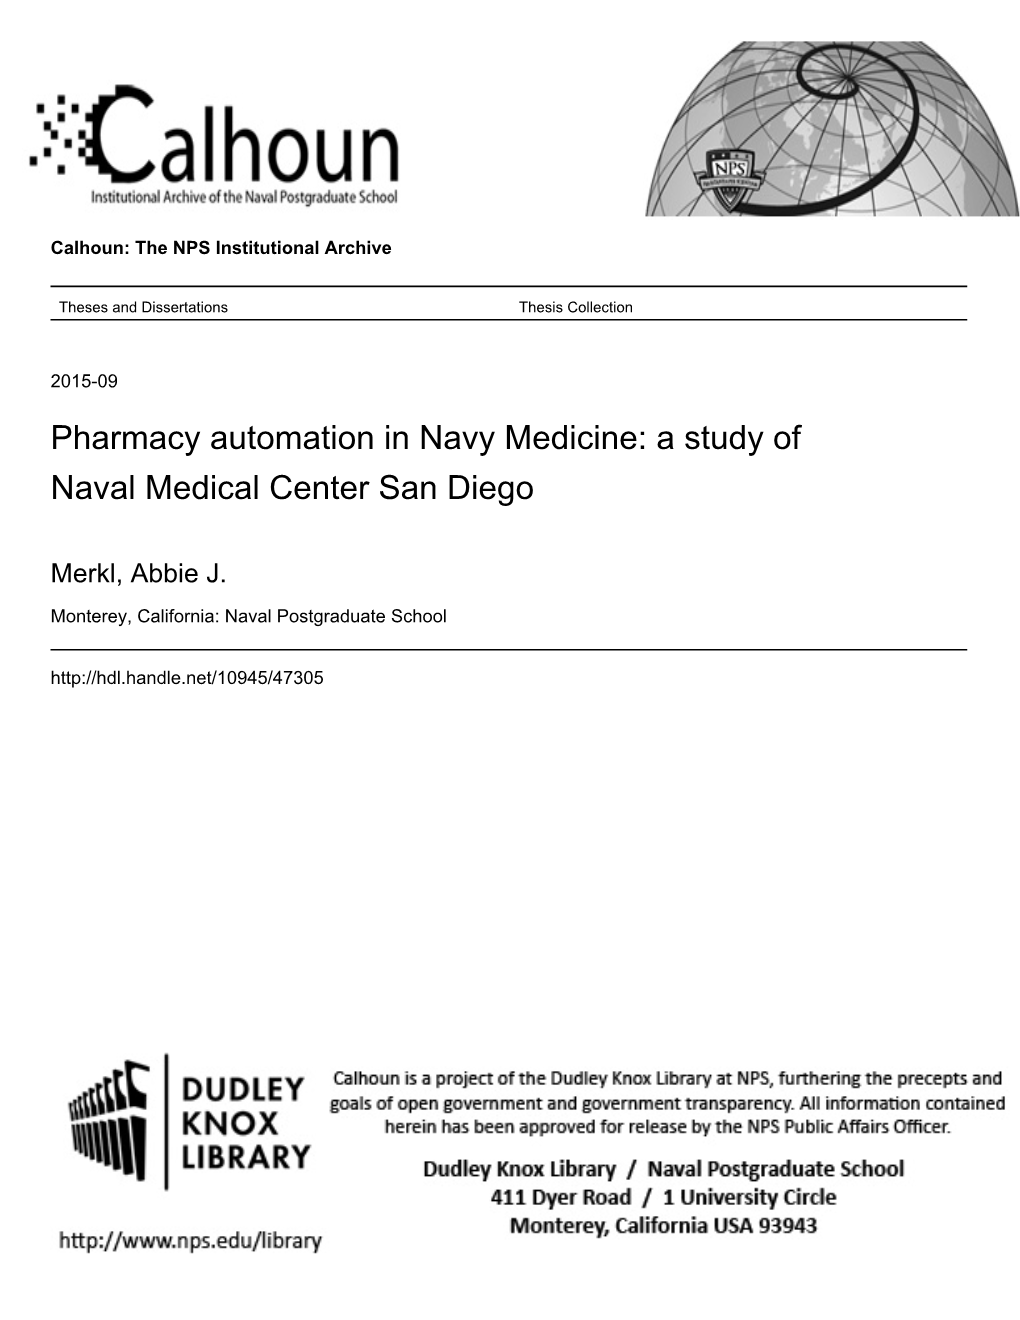 Pharmacy Automation in Navy Medicine: a Study of Naval Medical Center San Diego